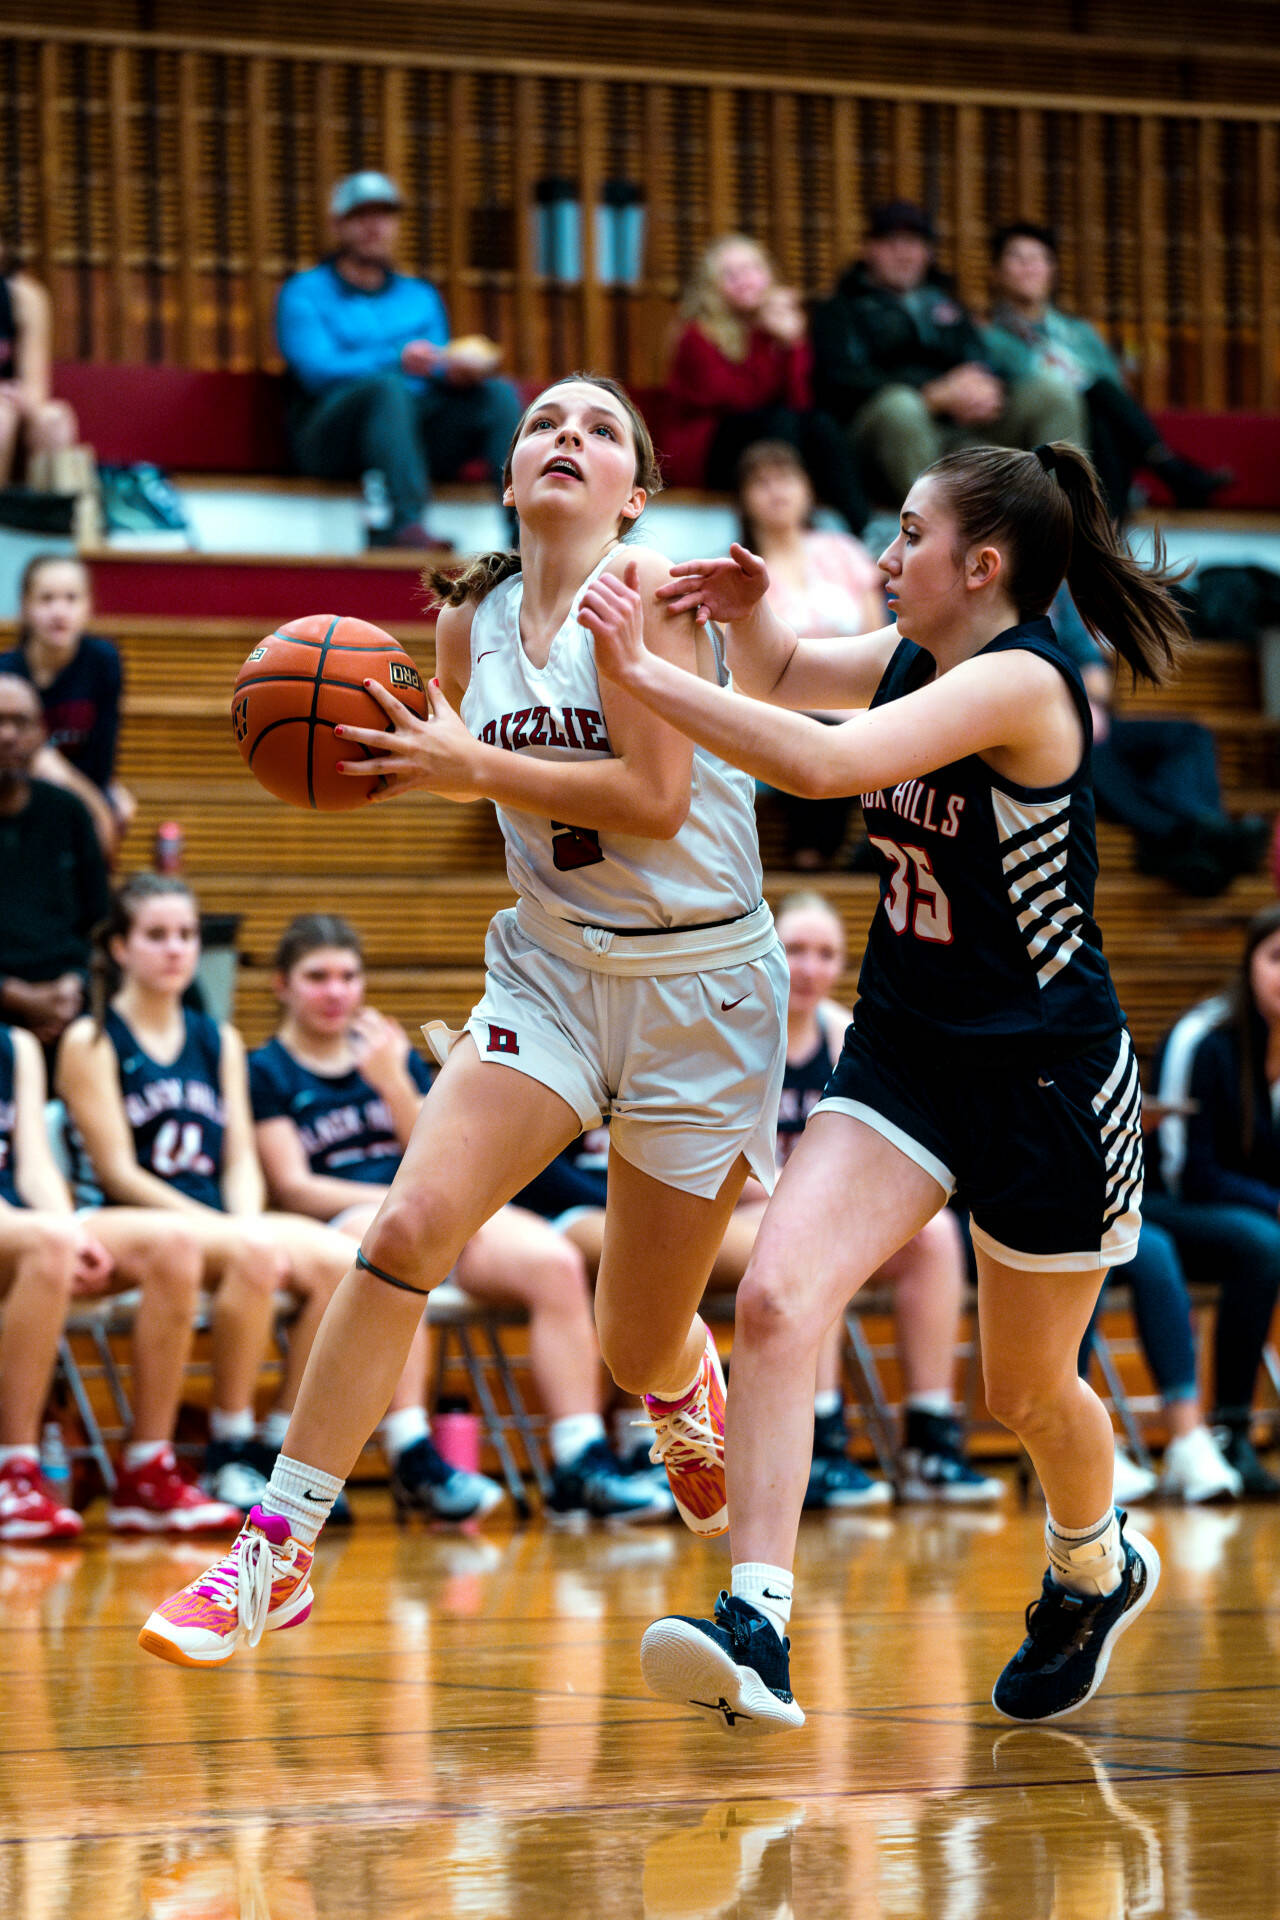 PHOTO BY FOREST WORGUM Hoquiam’s Lexi LaBounty, left, drives to the basket against Black Hills’ Kiley McMahon during the Grizzlies’ 64-28 loss on Tuesday in Hoquiam.